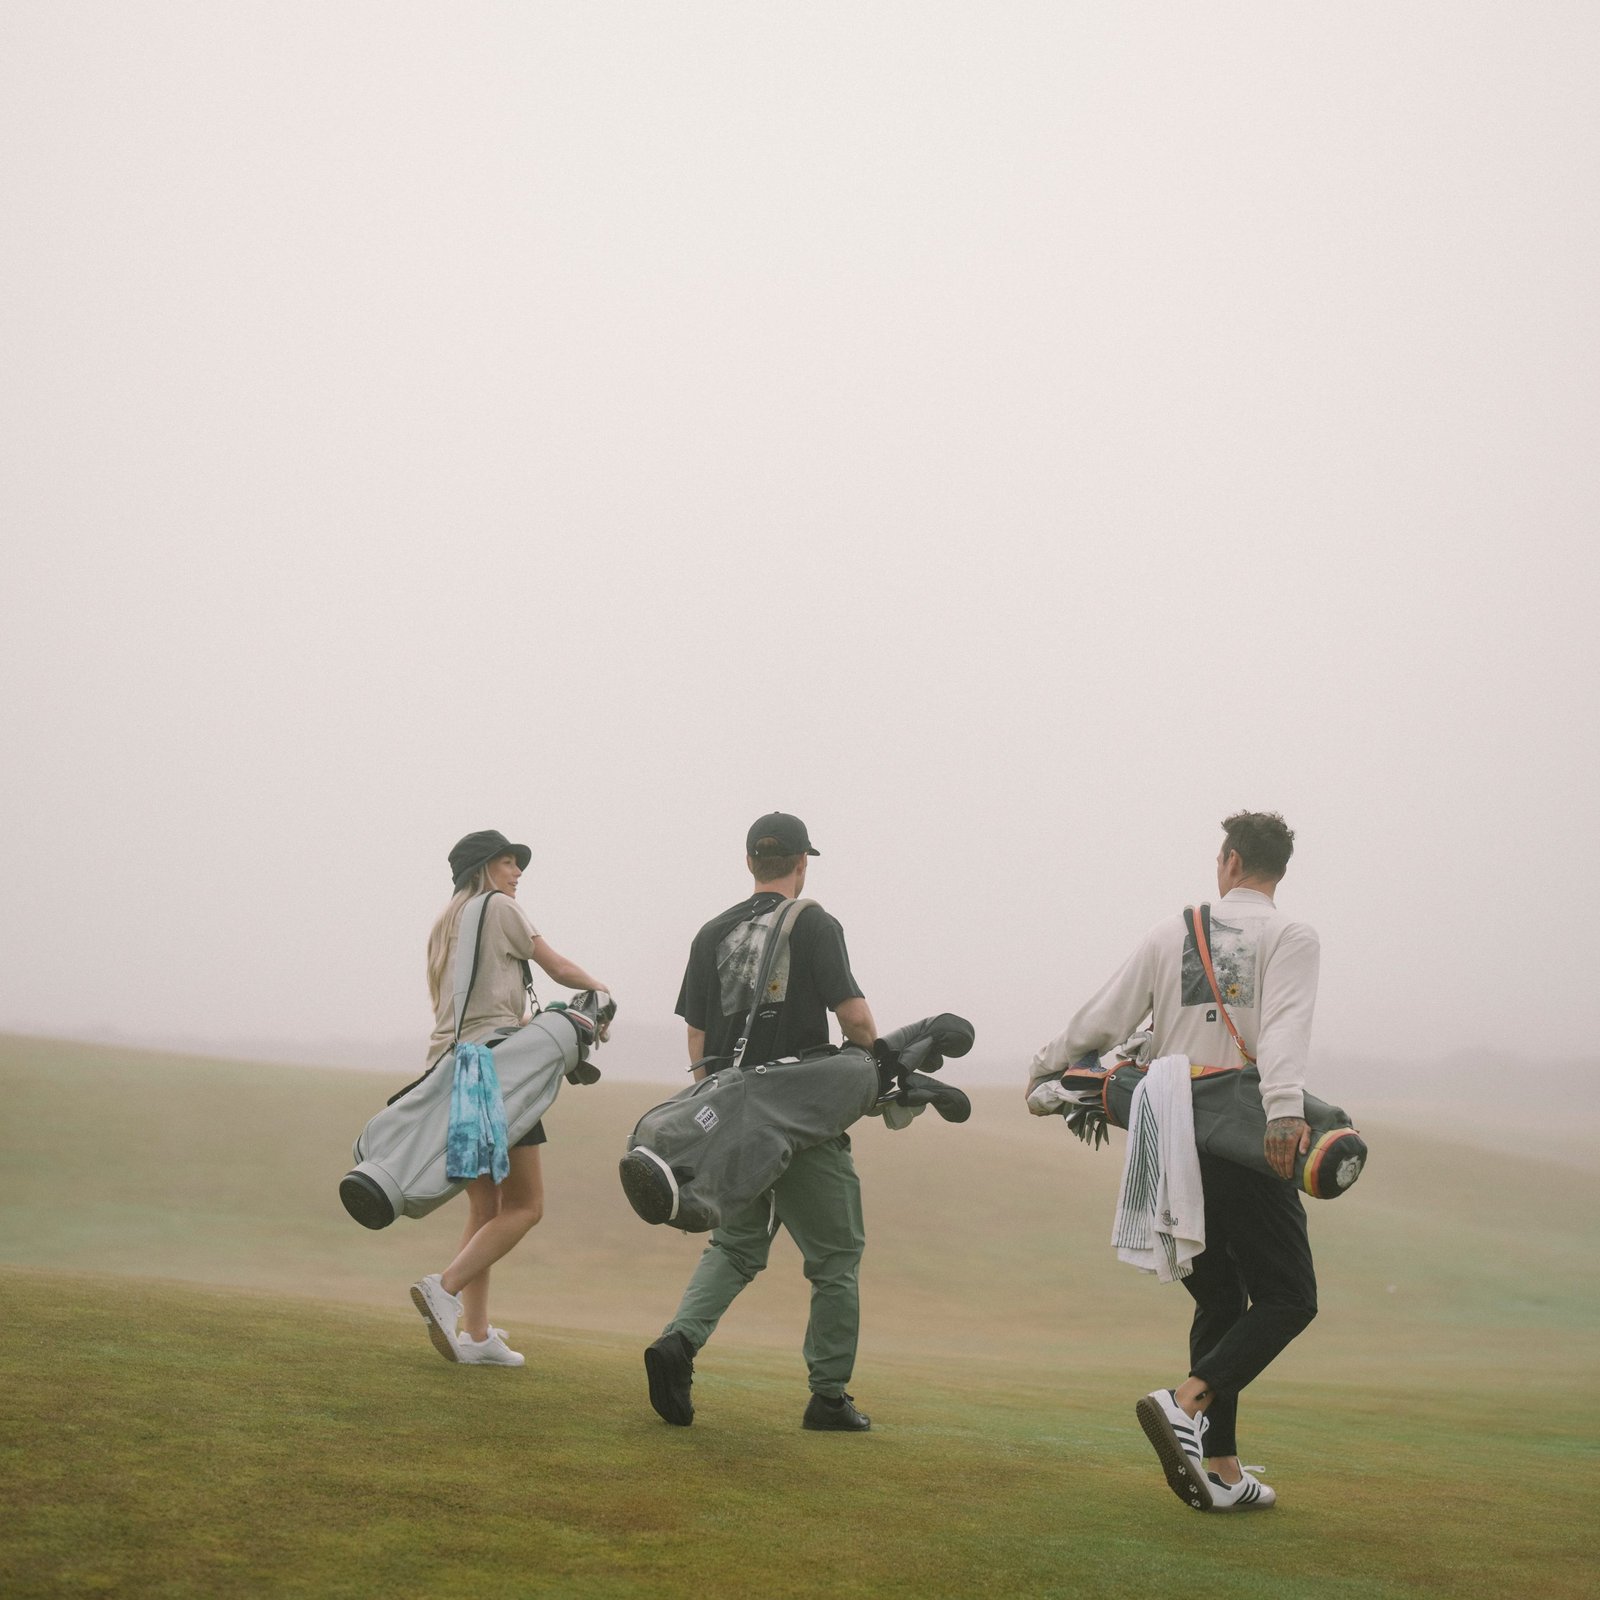 ADIDAS X BURNING CART SOCIETY COLLECTION REMINDS GOLFERS ABOUT THE IMPORTANCE OF NATURE IN THE SPORT © Copyright PLPG GLOBAL MEDIA 2023